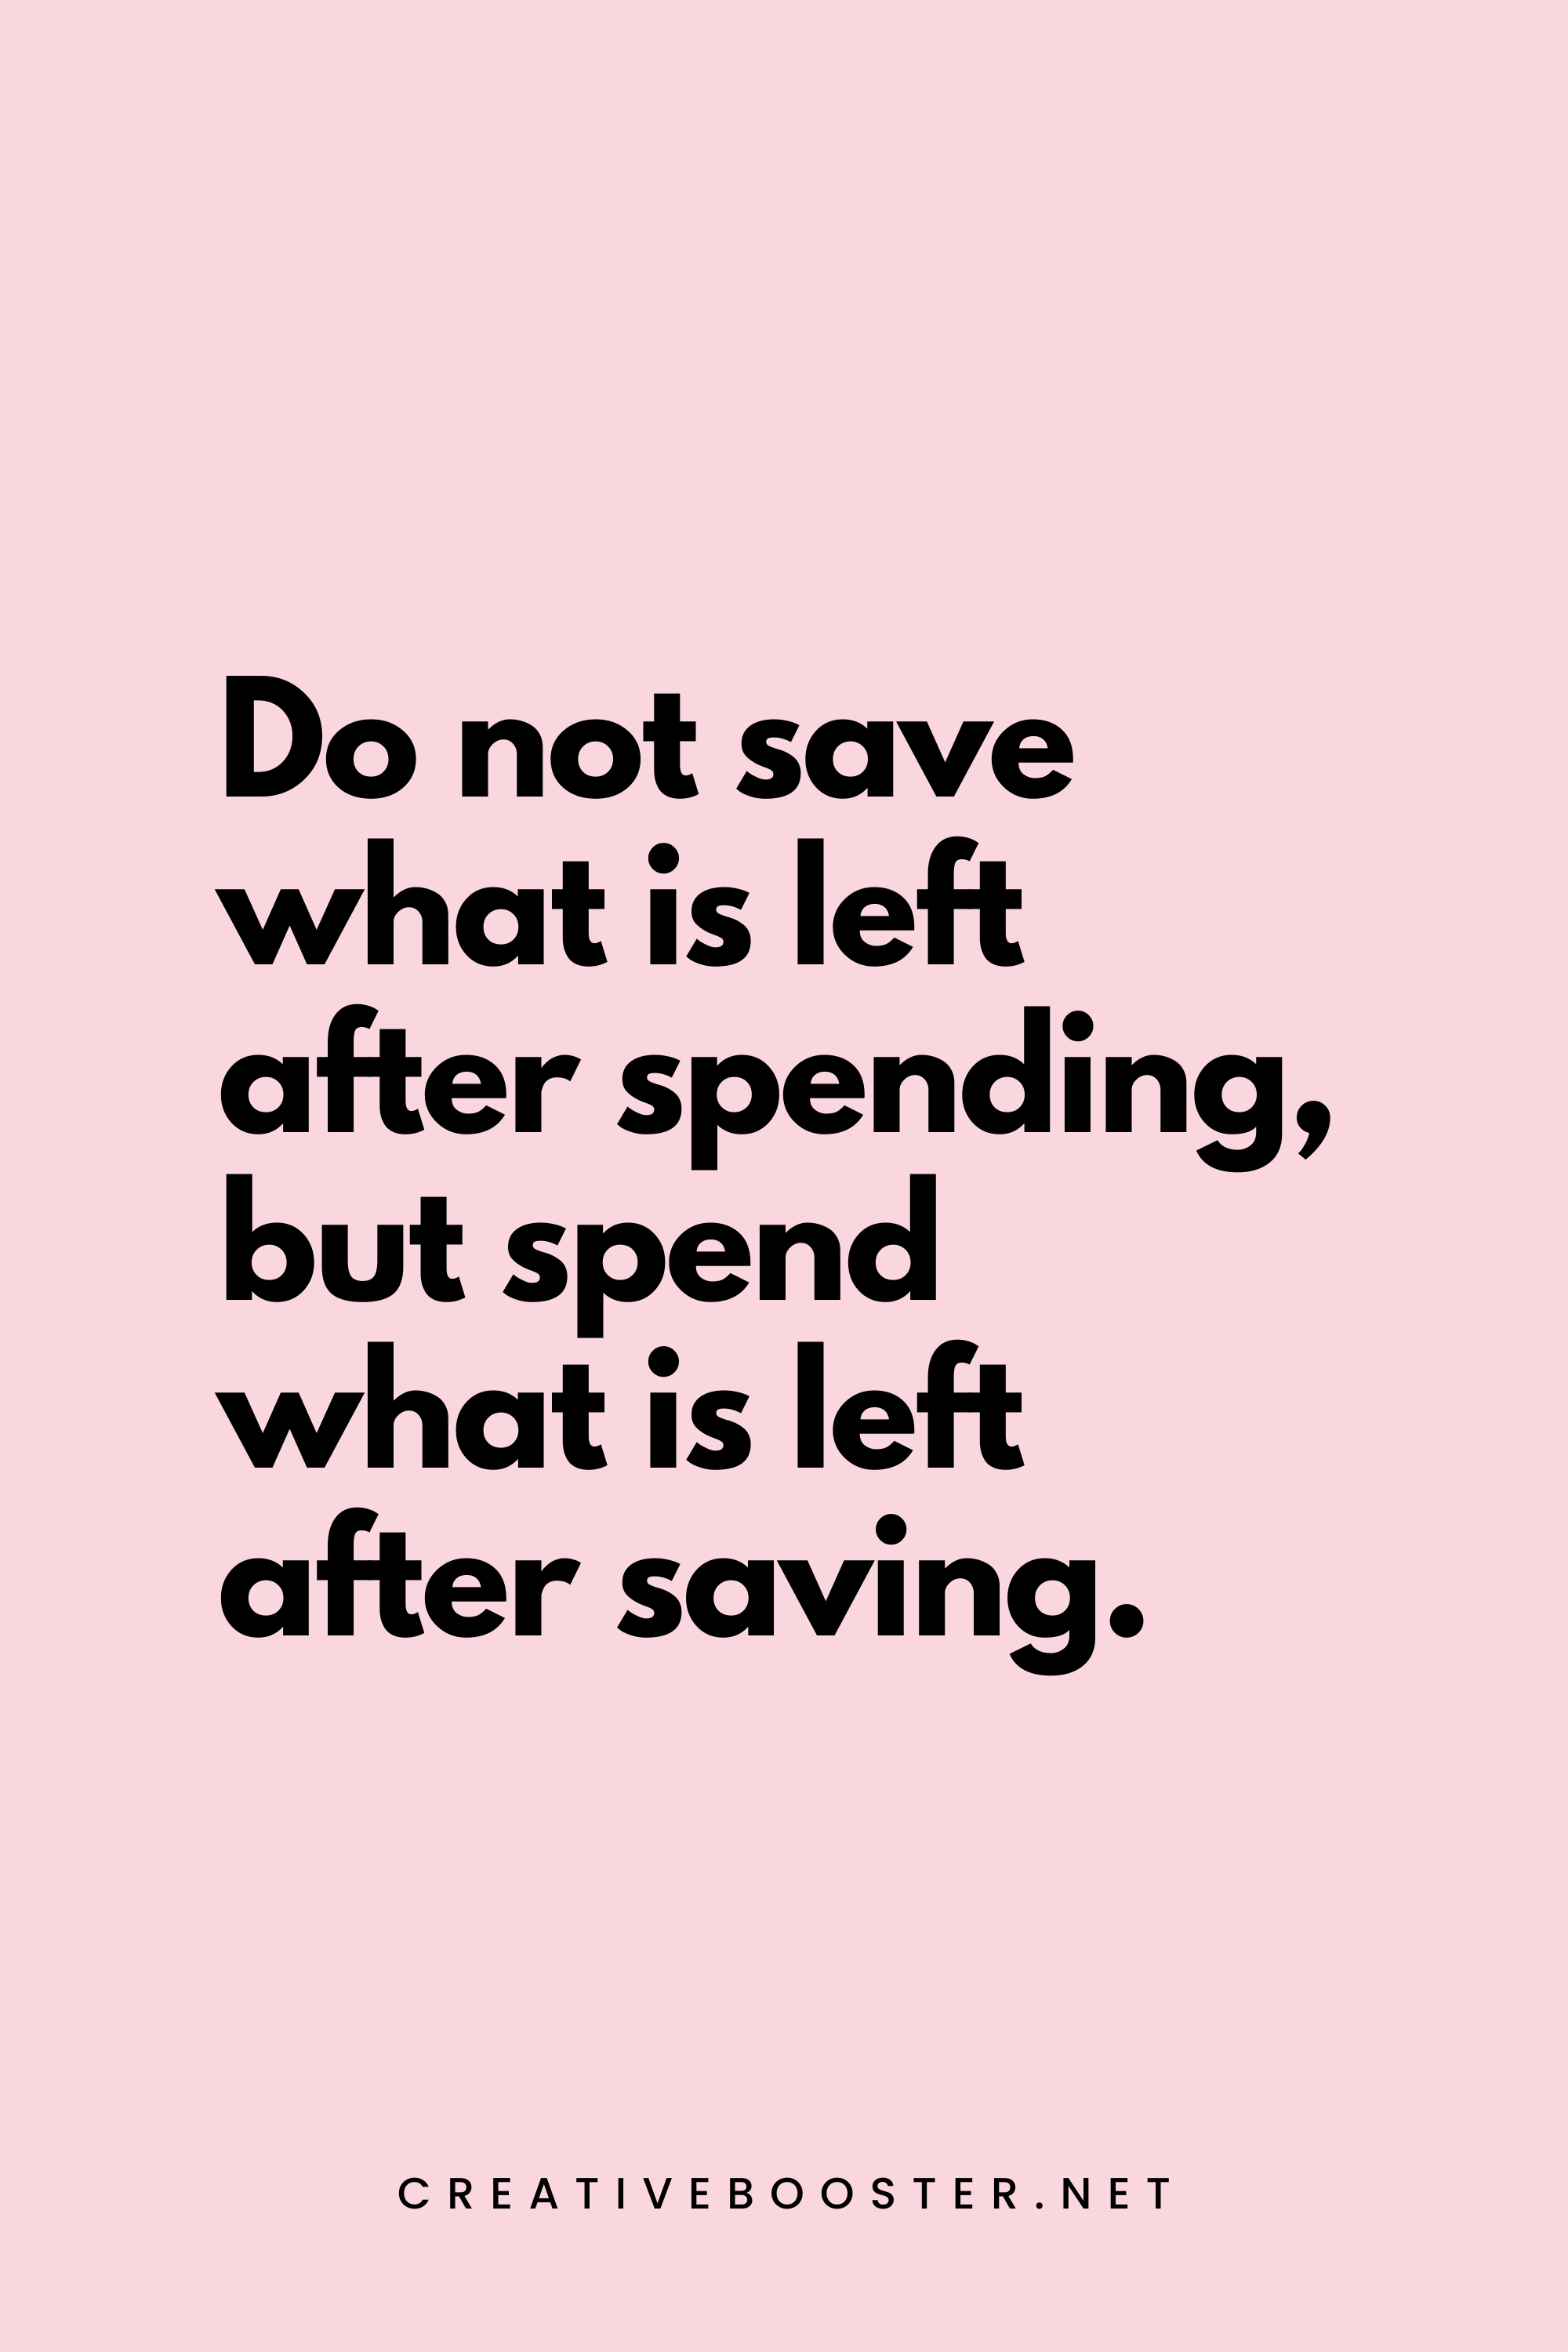 75. Do not save what is left after spending, but spend what is left after saving. - Warren Buffett - 8. Financial Freedom Quotes by Warren Buffett